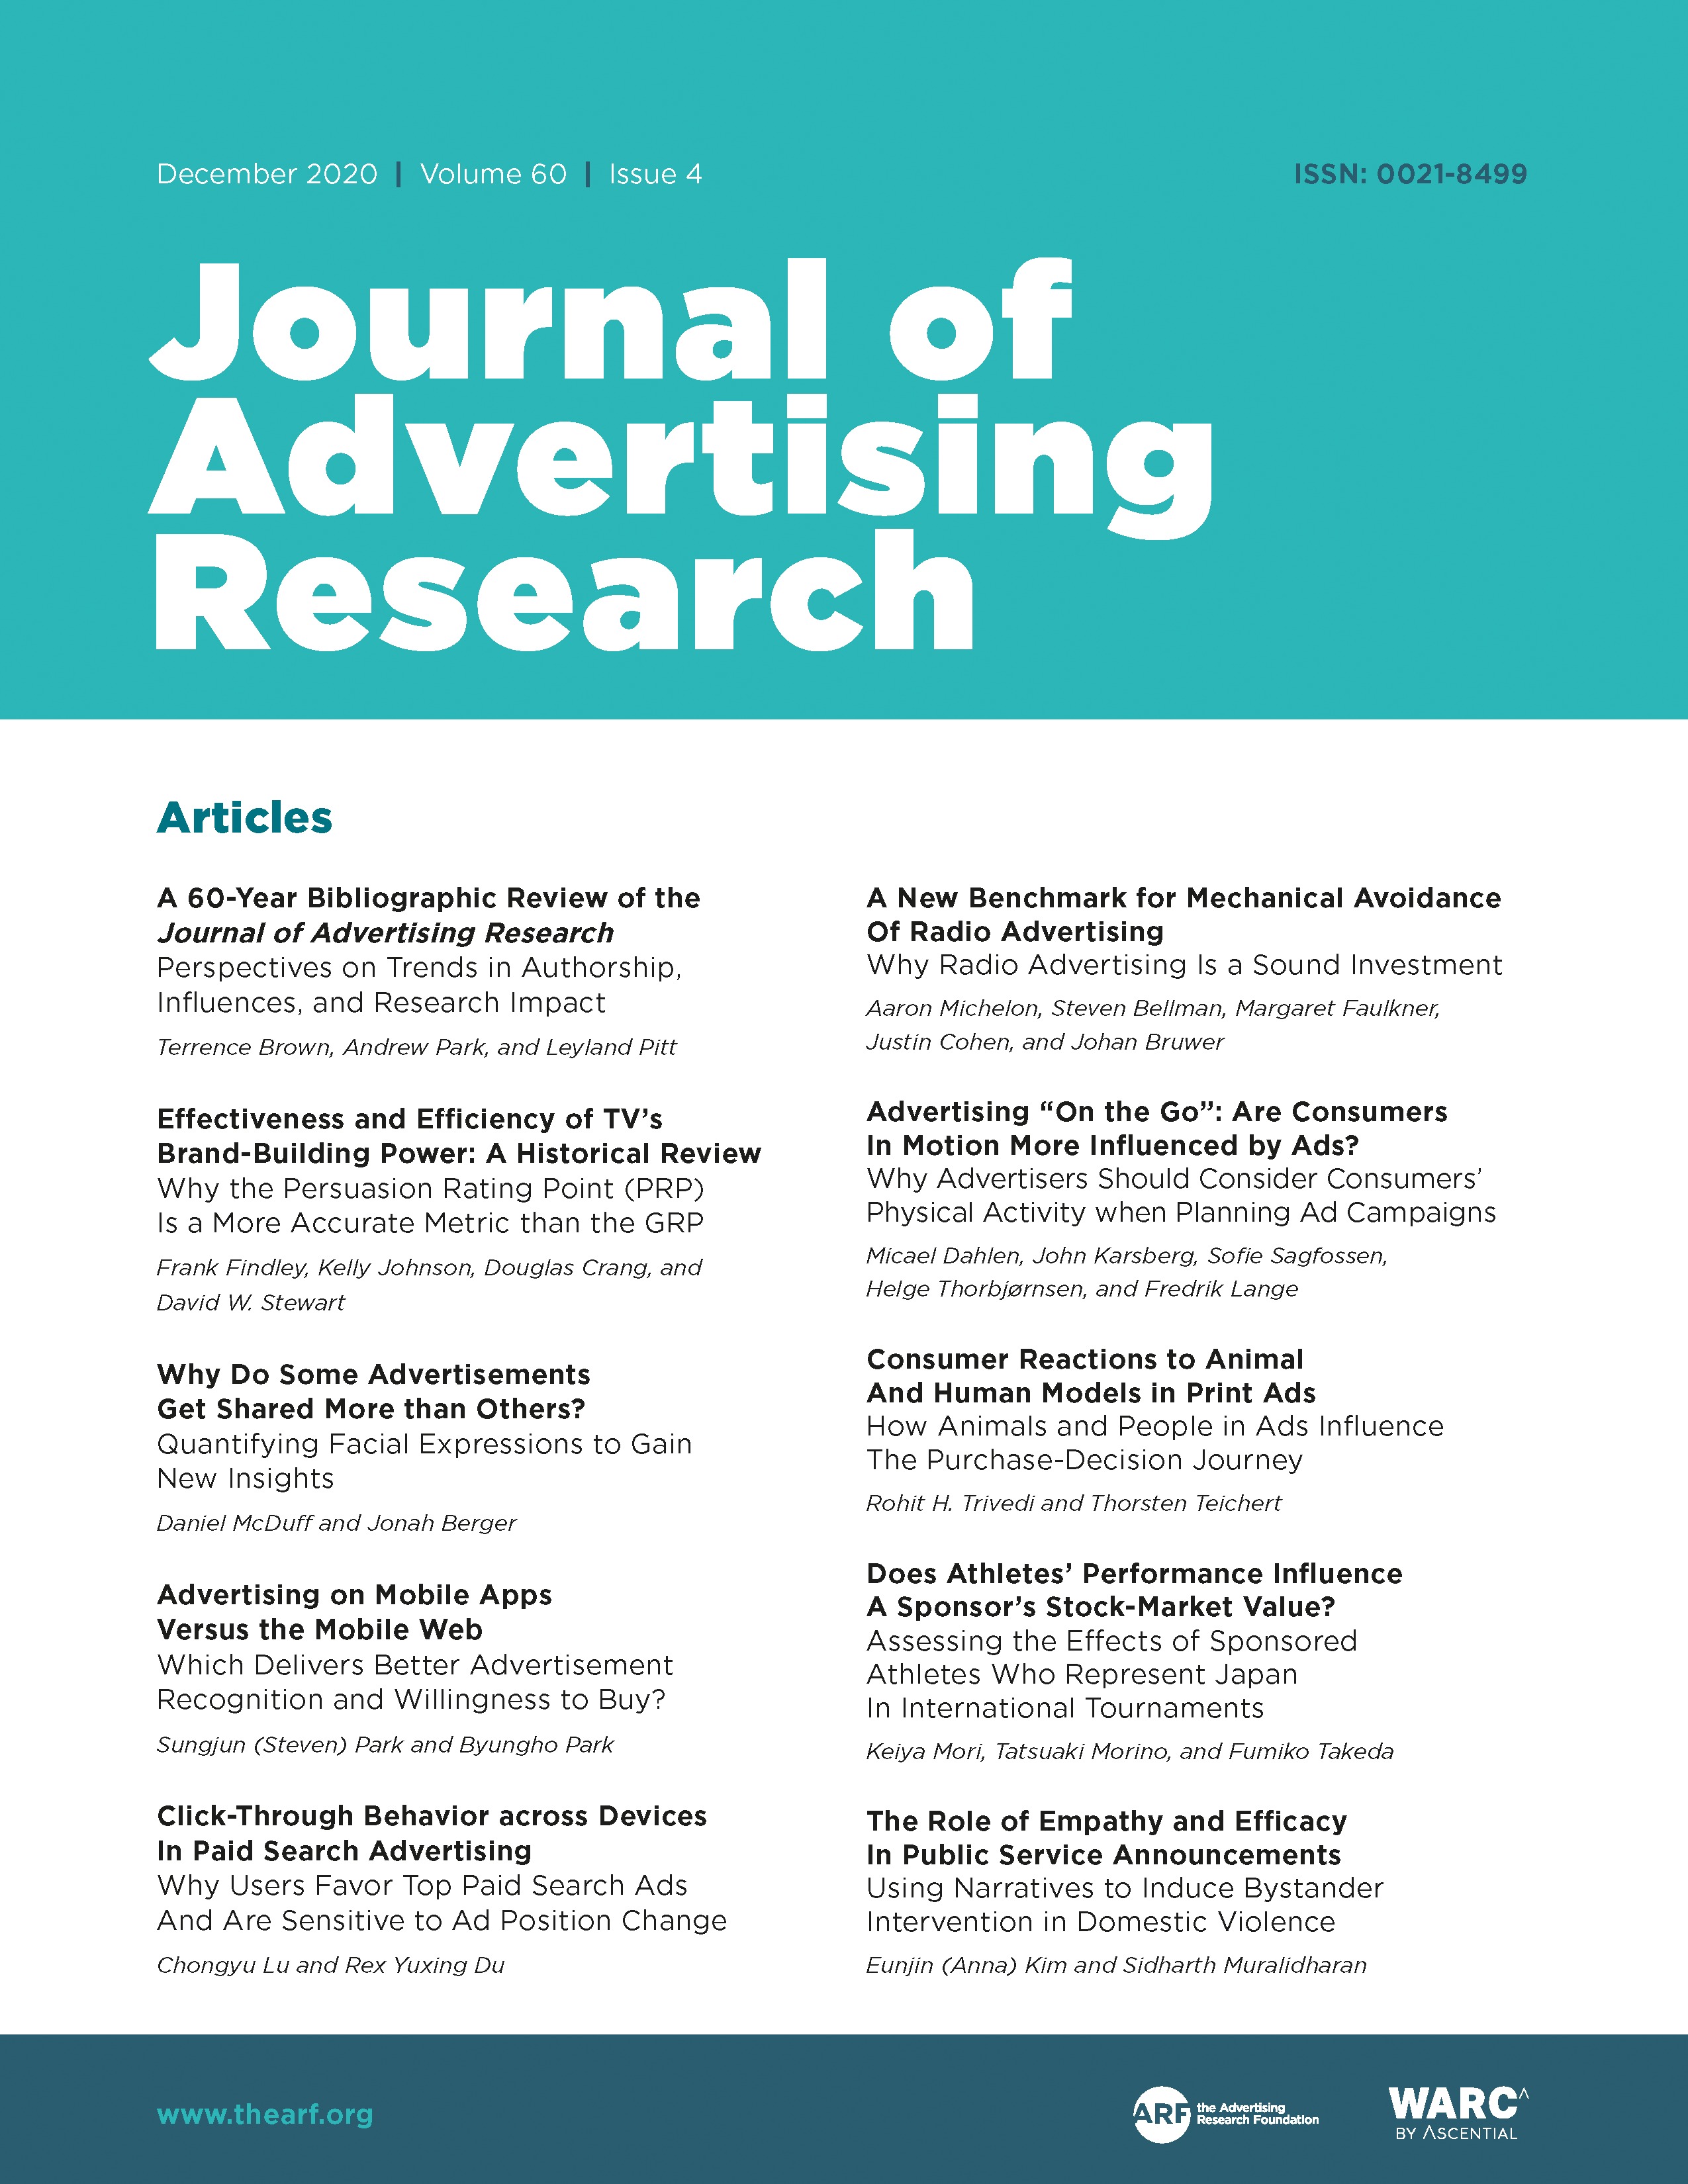 Consumer Reactions to Animal And Human Models in Print Ads | the Journal of  Advertising Research